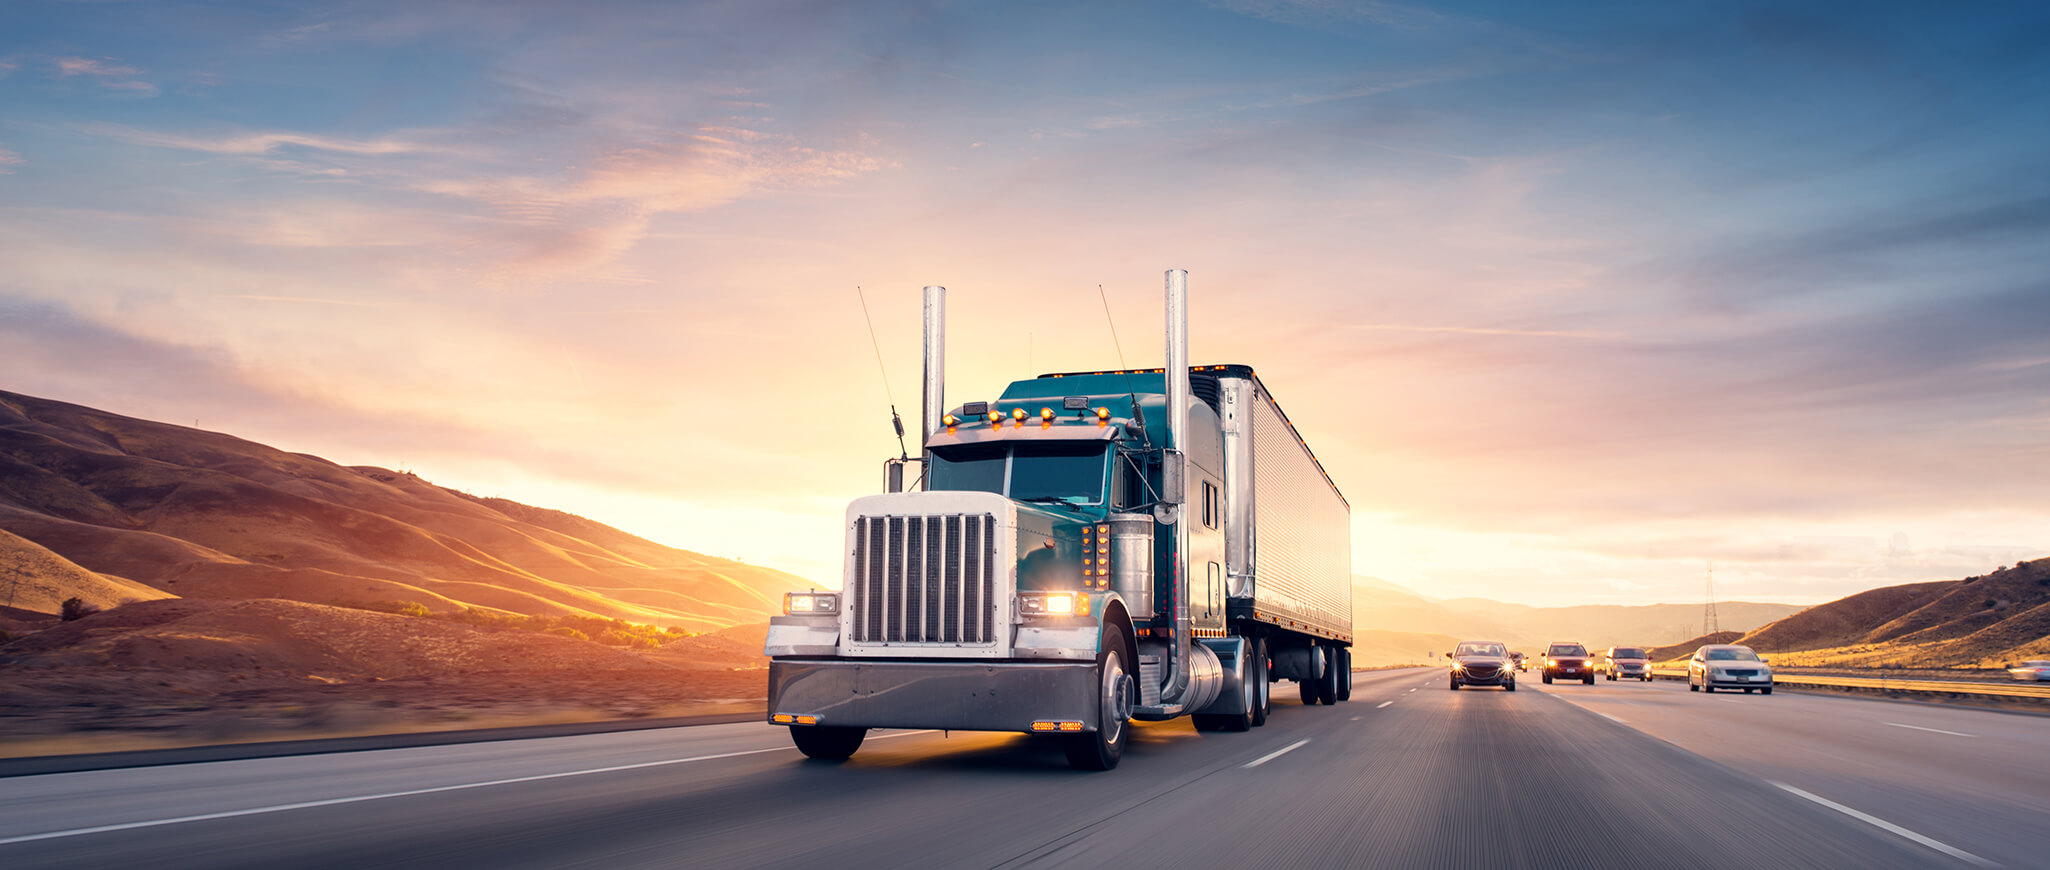 A Brief History of the U.S. Trucking Industry